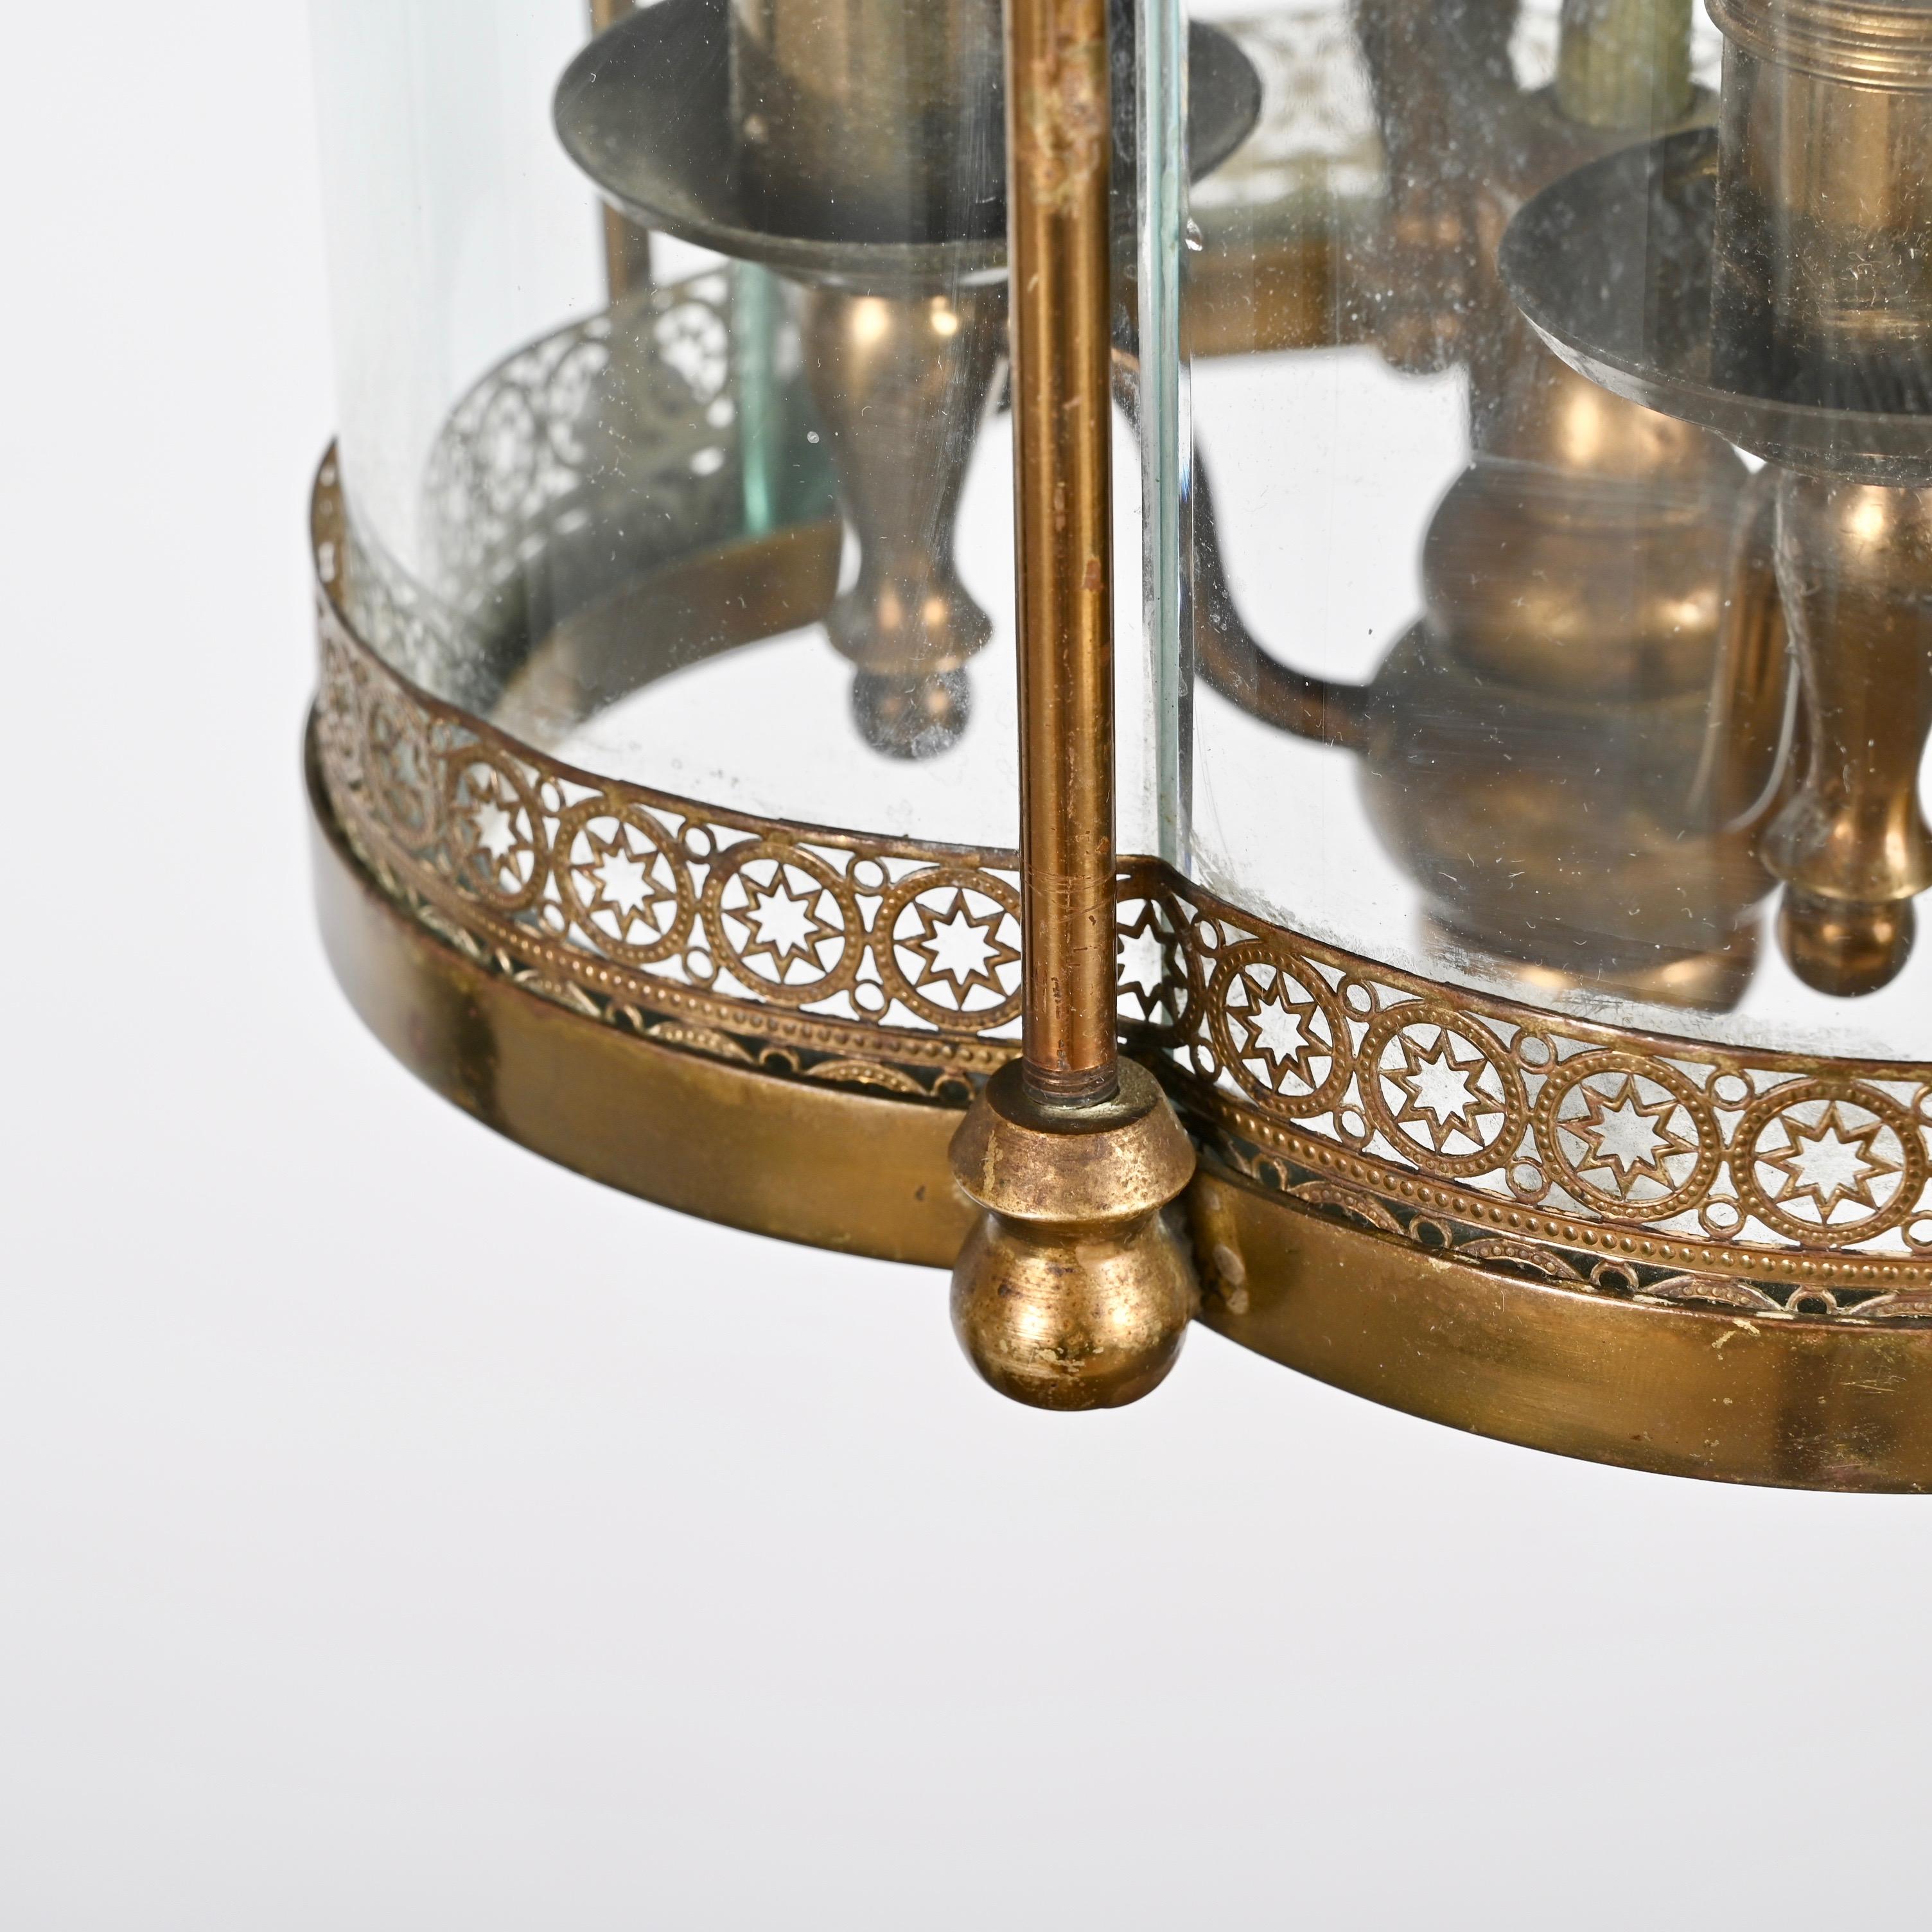 Art Deco Brass and Semicircular Glass Italian Chandelier after Adolf Loos, 1950s For Sale 14